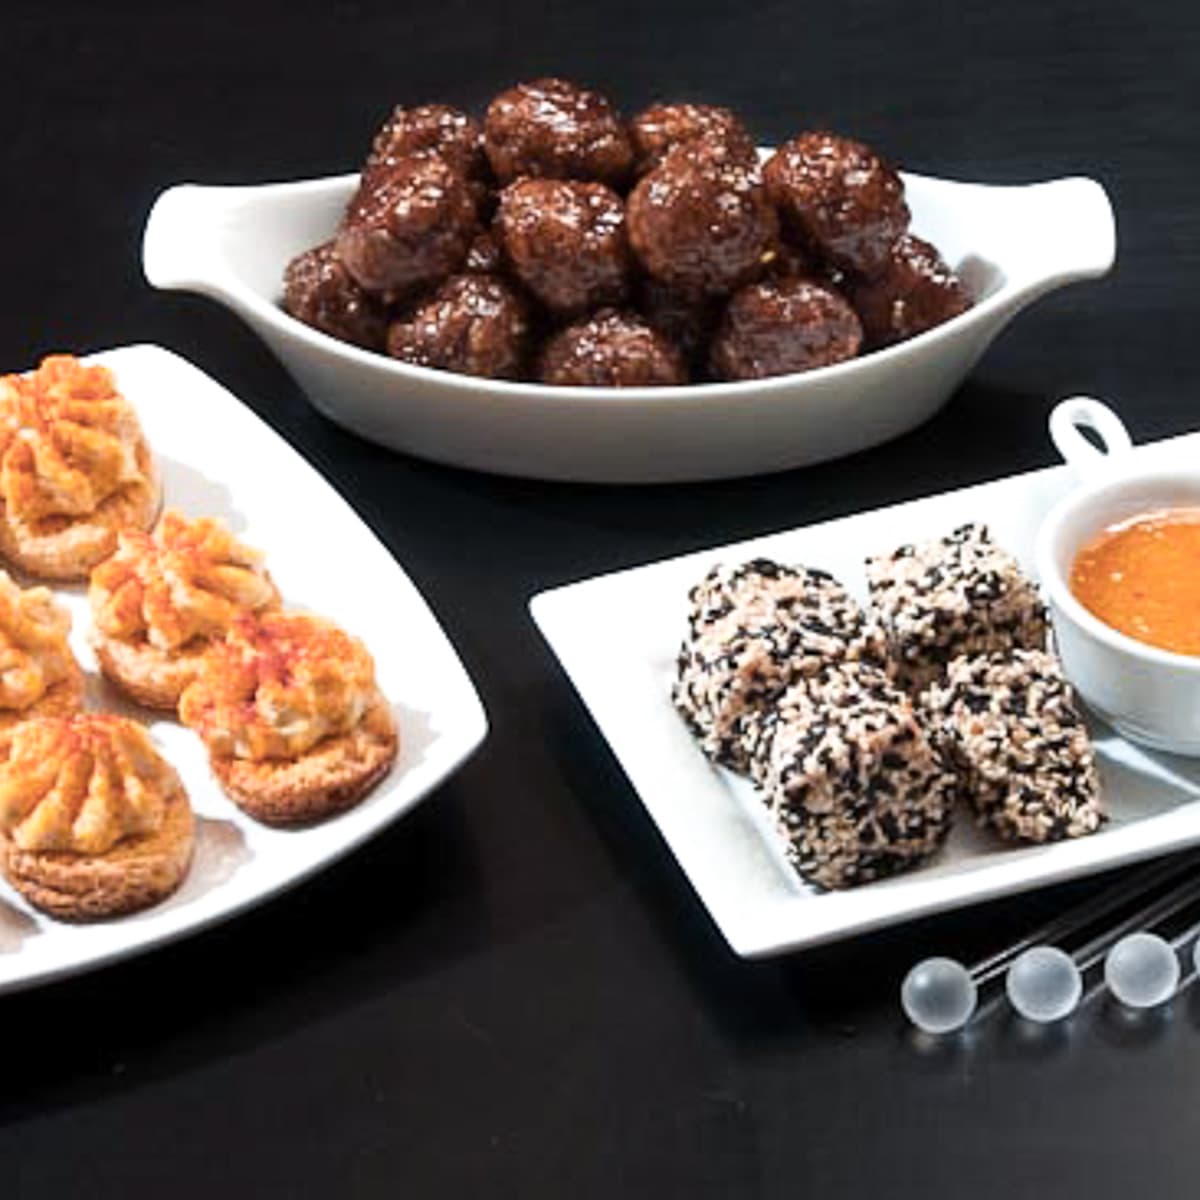 Last Minute appetizers features  a spicy meatball, sesame salmon with an apricot ginger sauce, and artichoke croustades all of which can be made ahead.